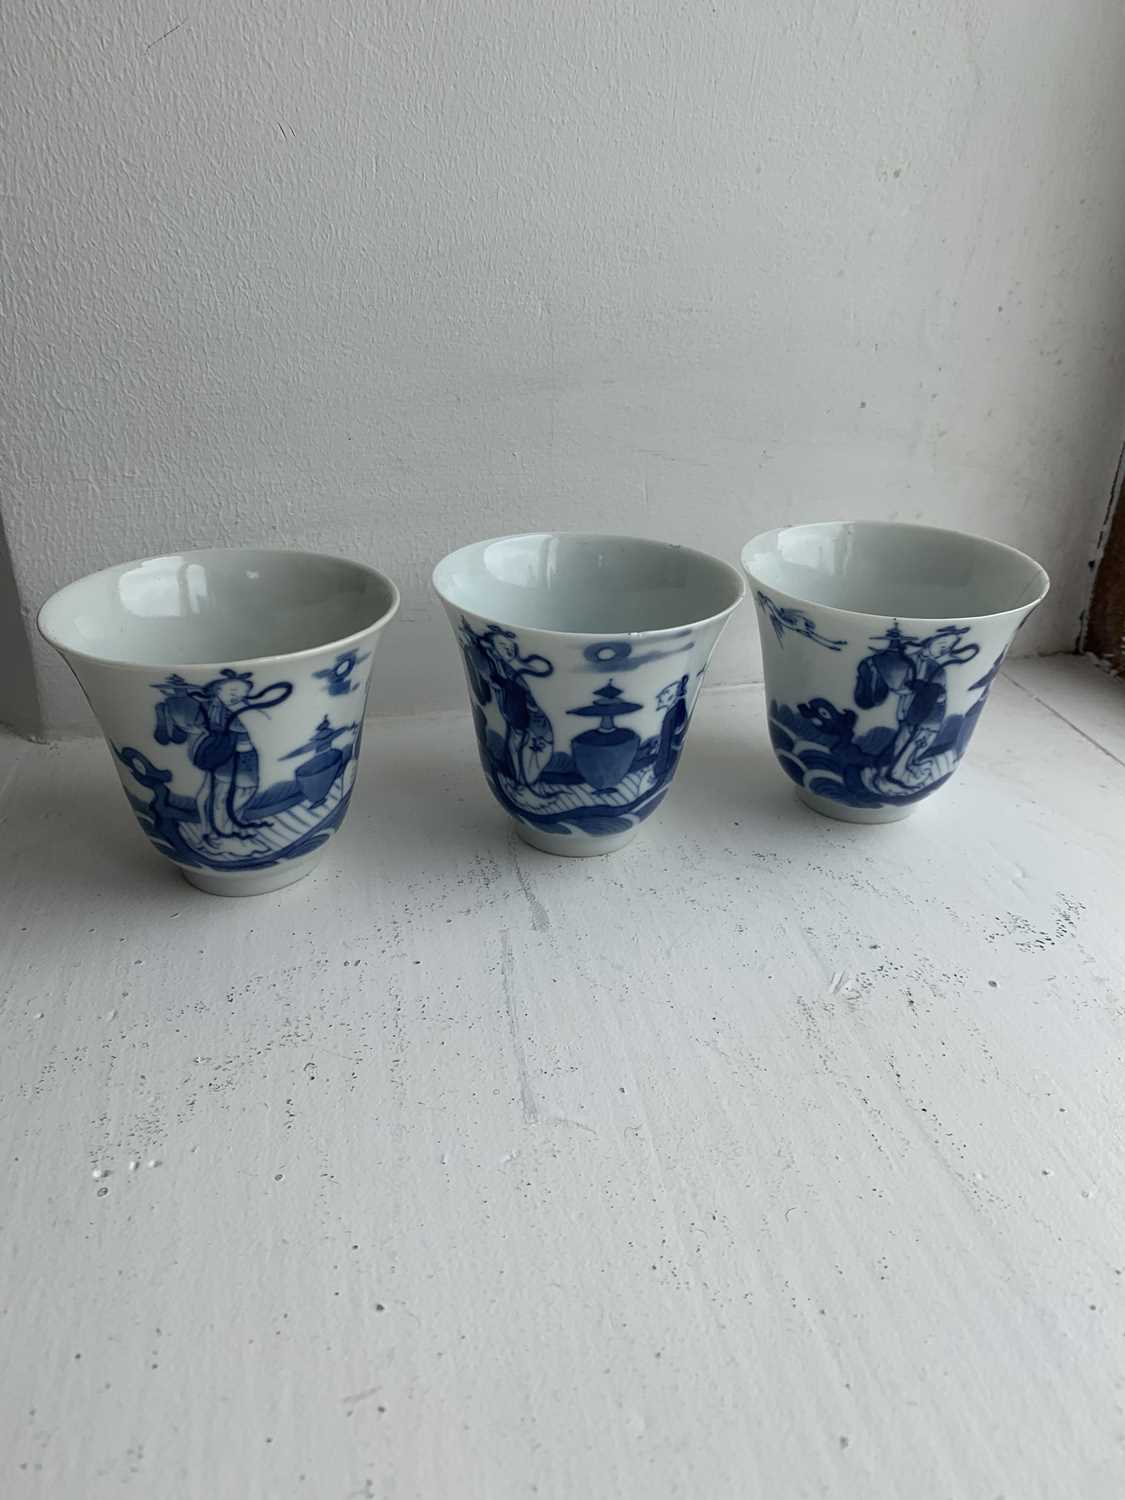 A set of Chinese blue and white porcelain cups, covers and stands, 18th century. - Image 40 of 41